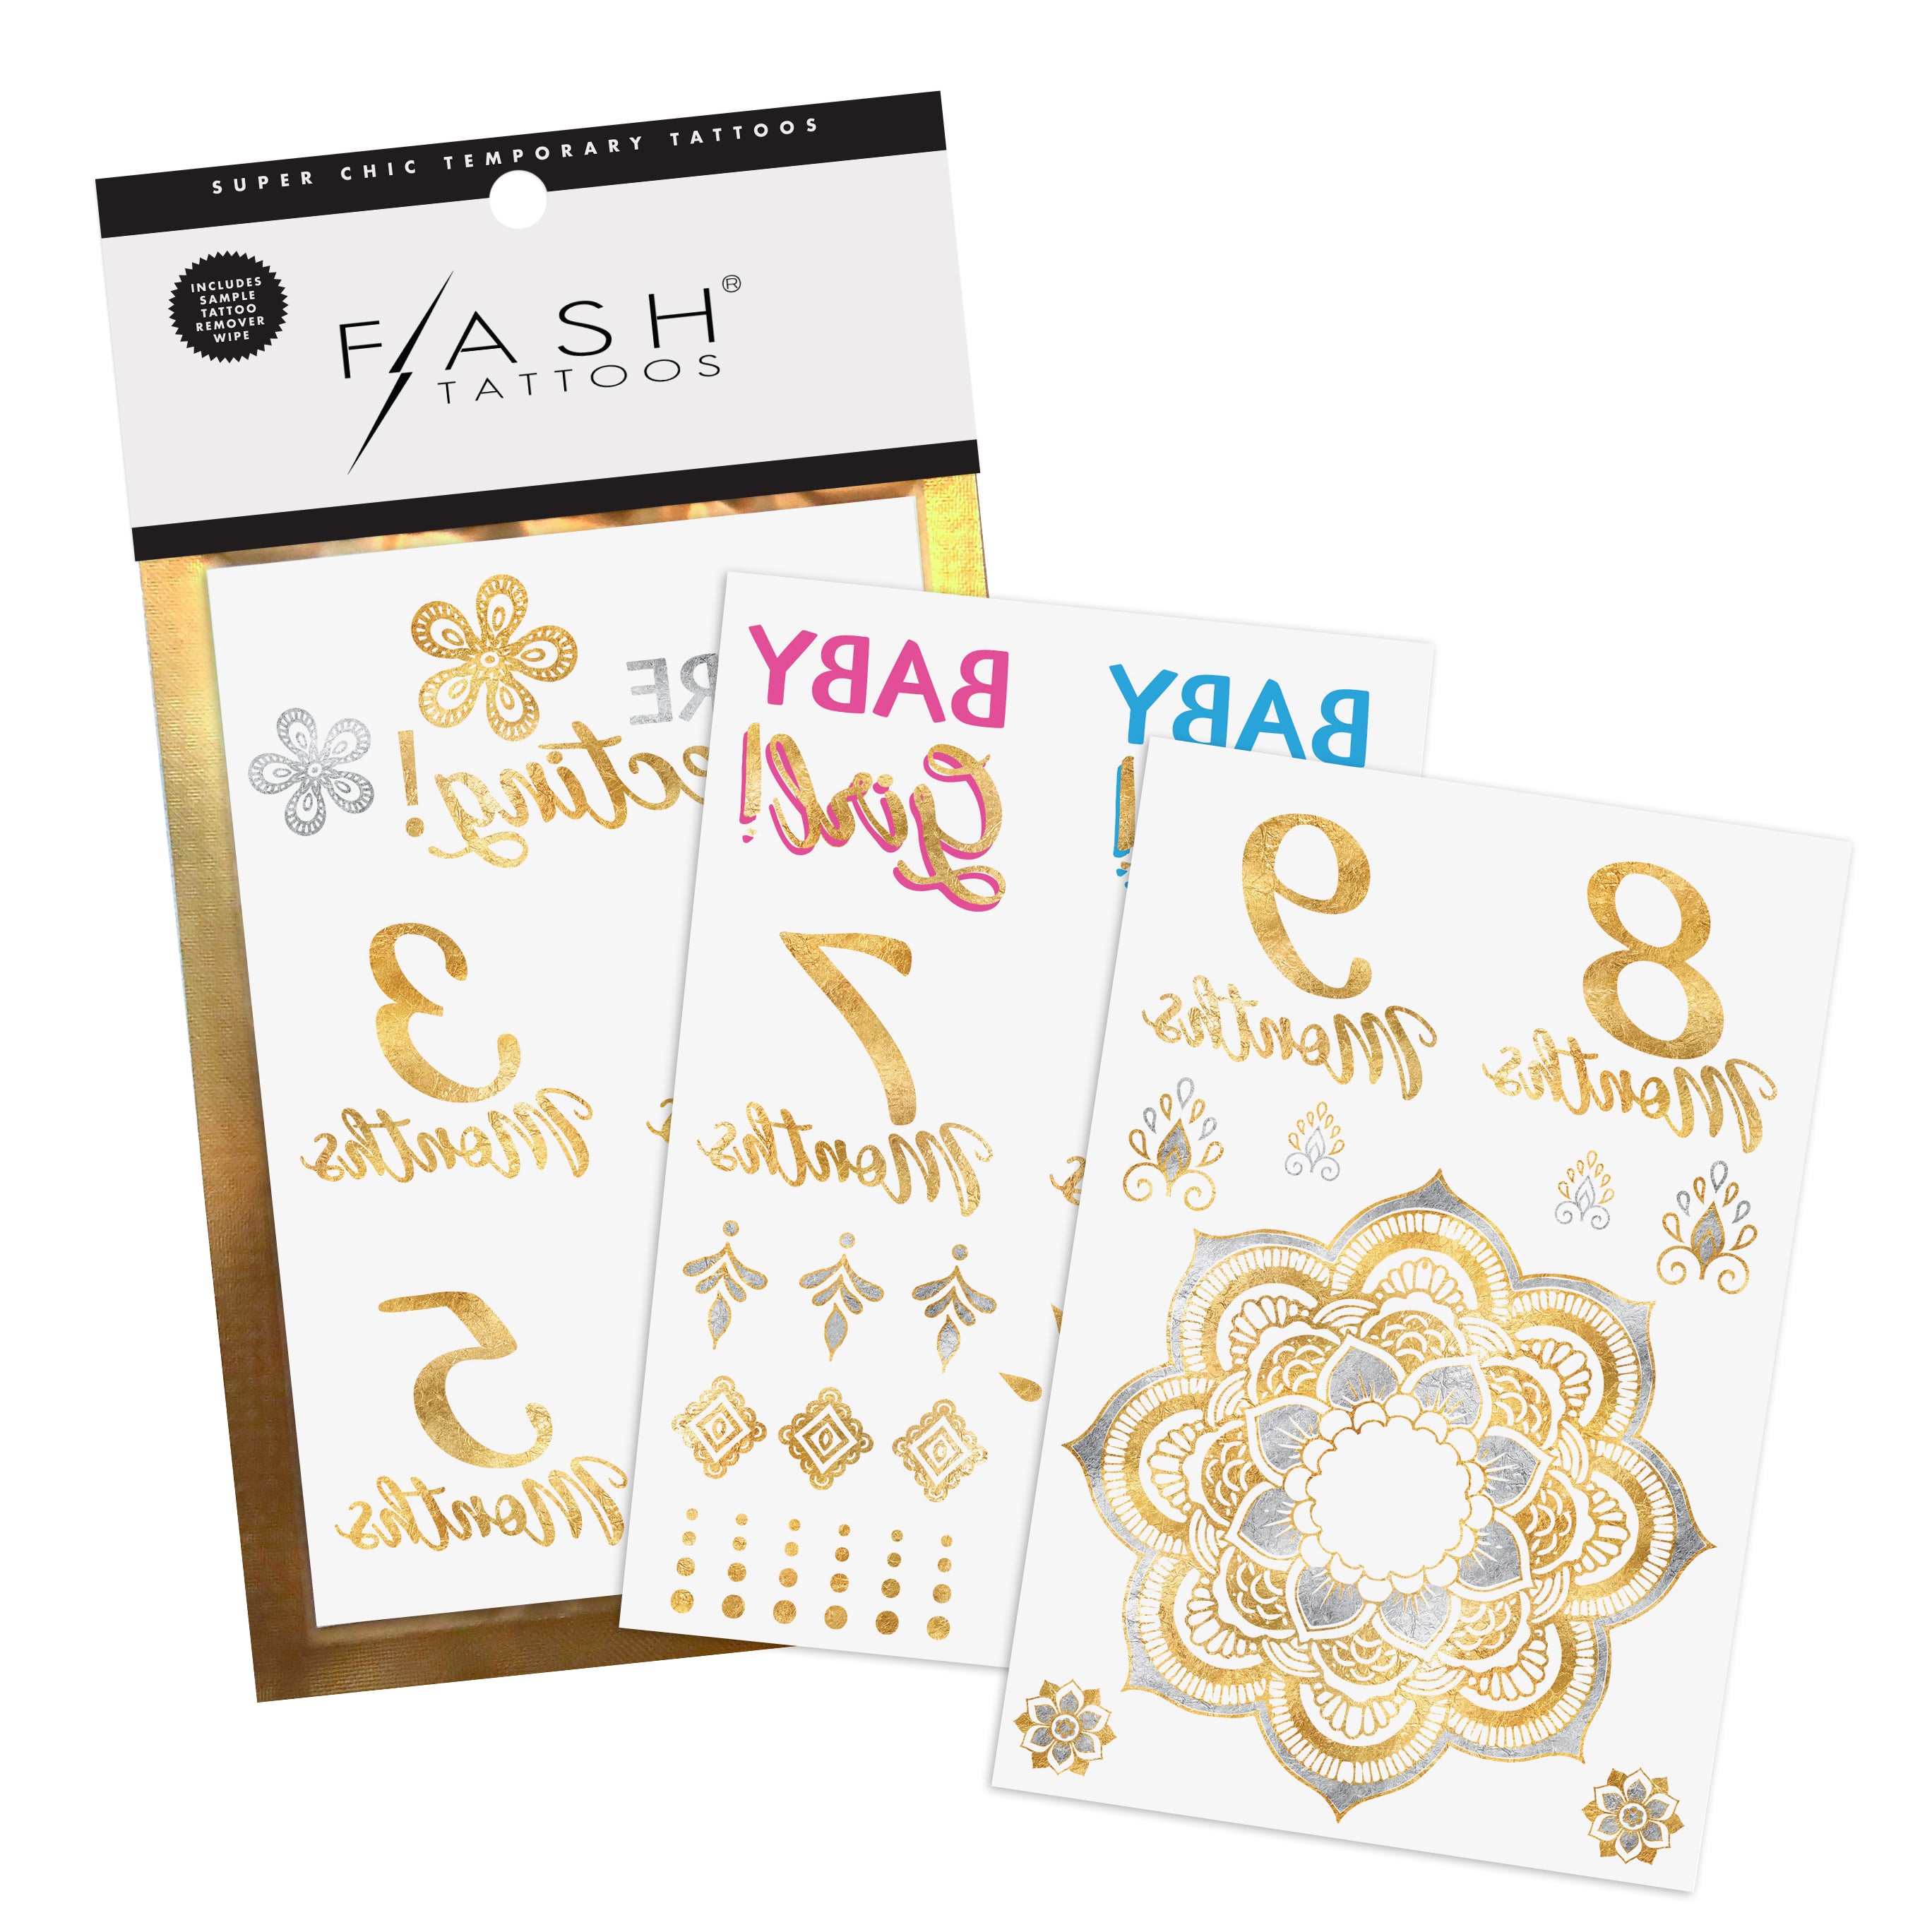 Mama Milestones Henna pack features over 27 different chic henna-inspired belly tattoos. @FlashTattoos #flashtat